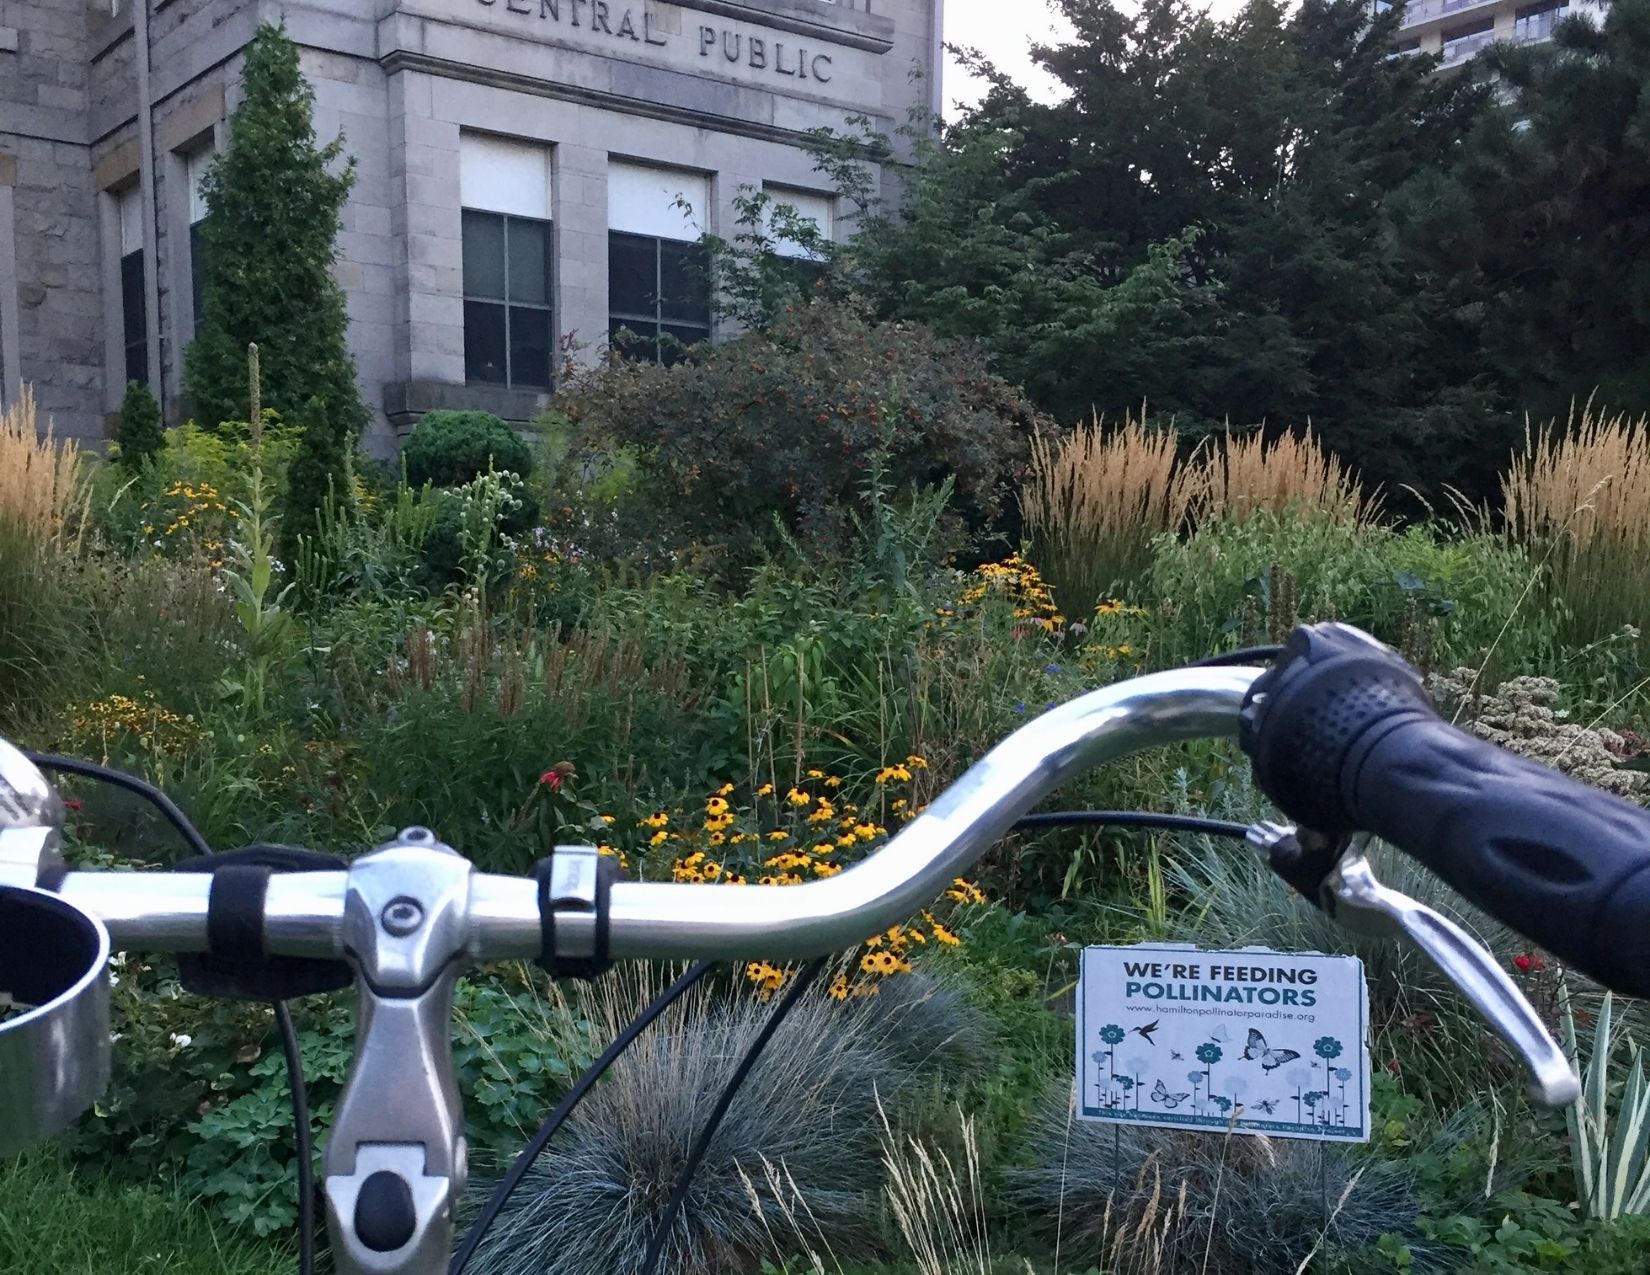 Bicycle handlebars in front of a pollinator garden